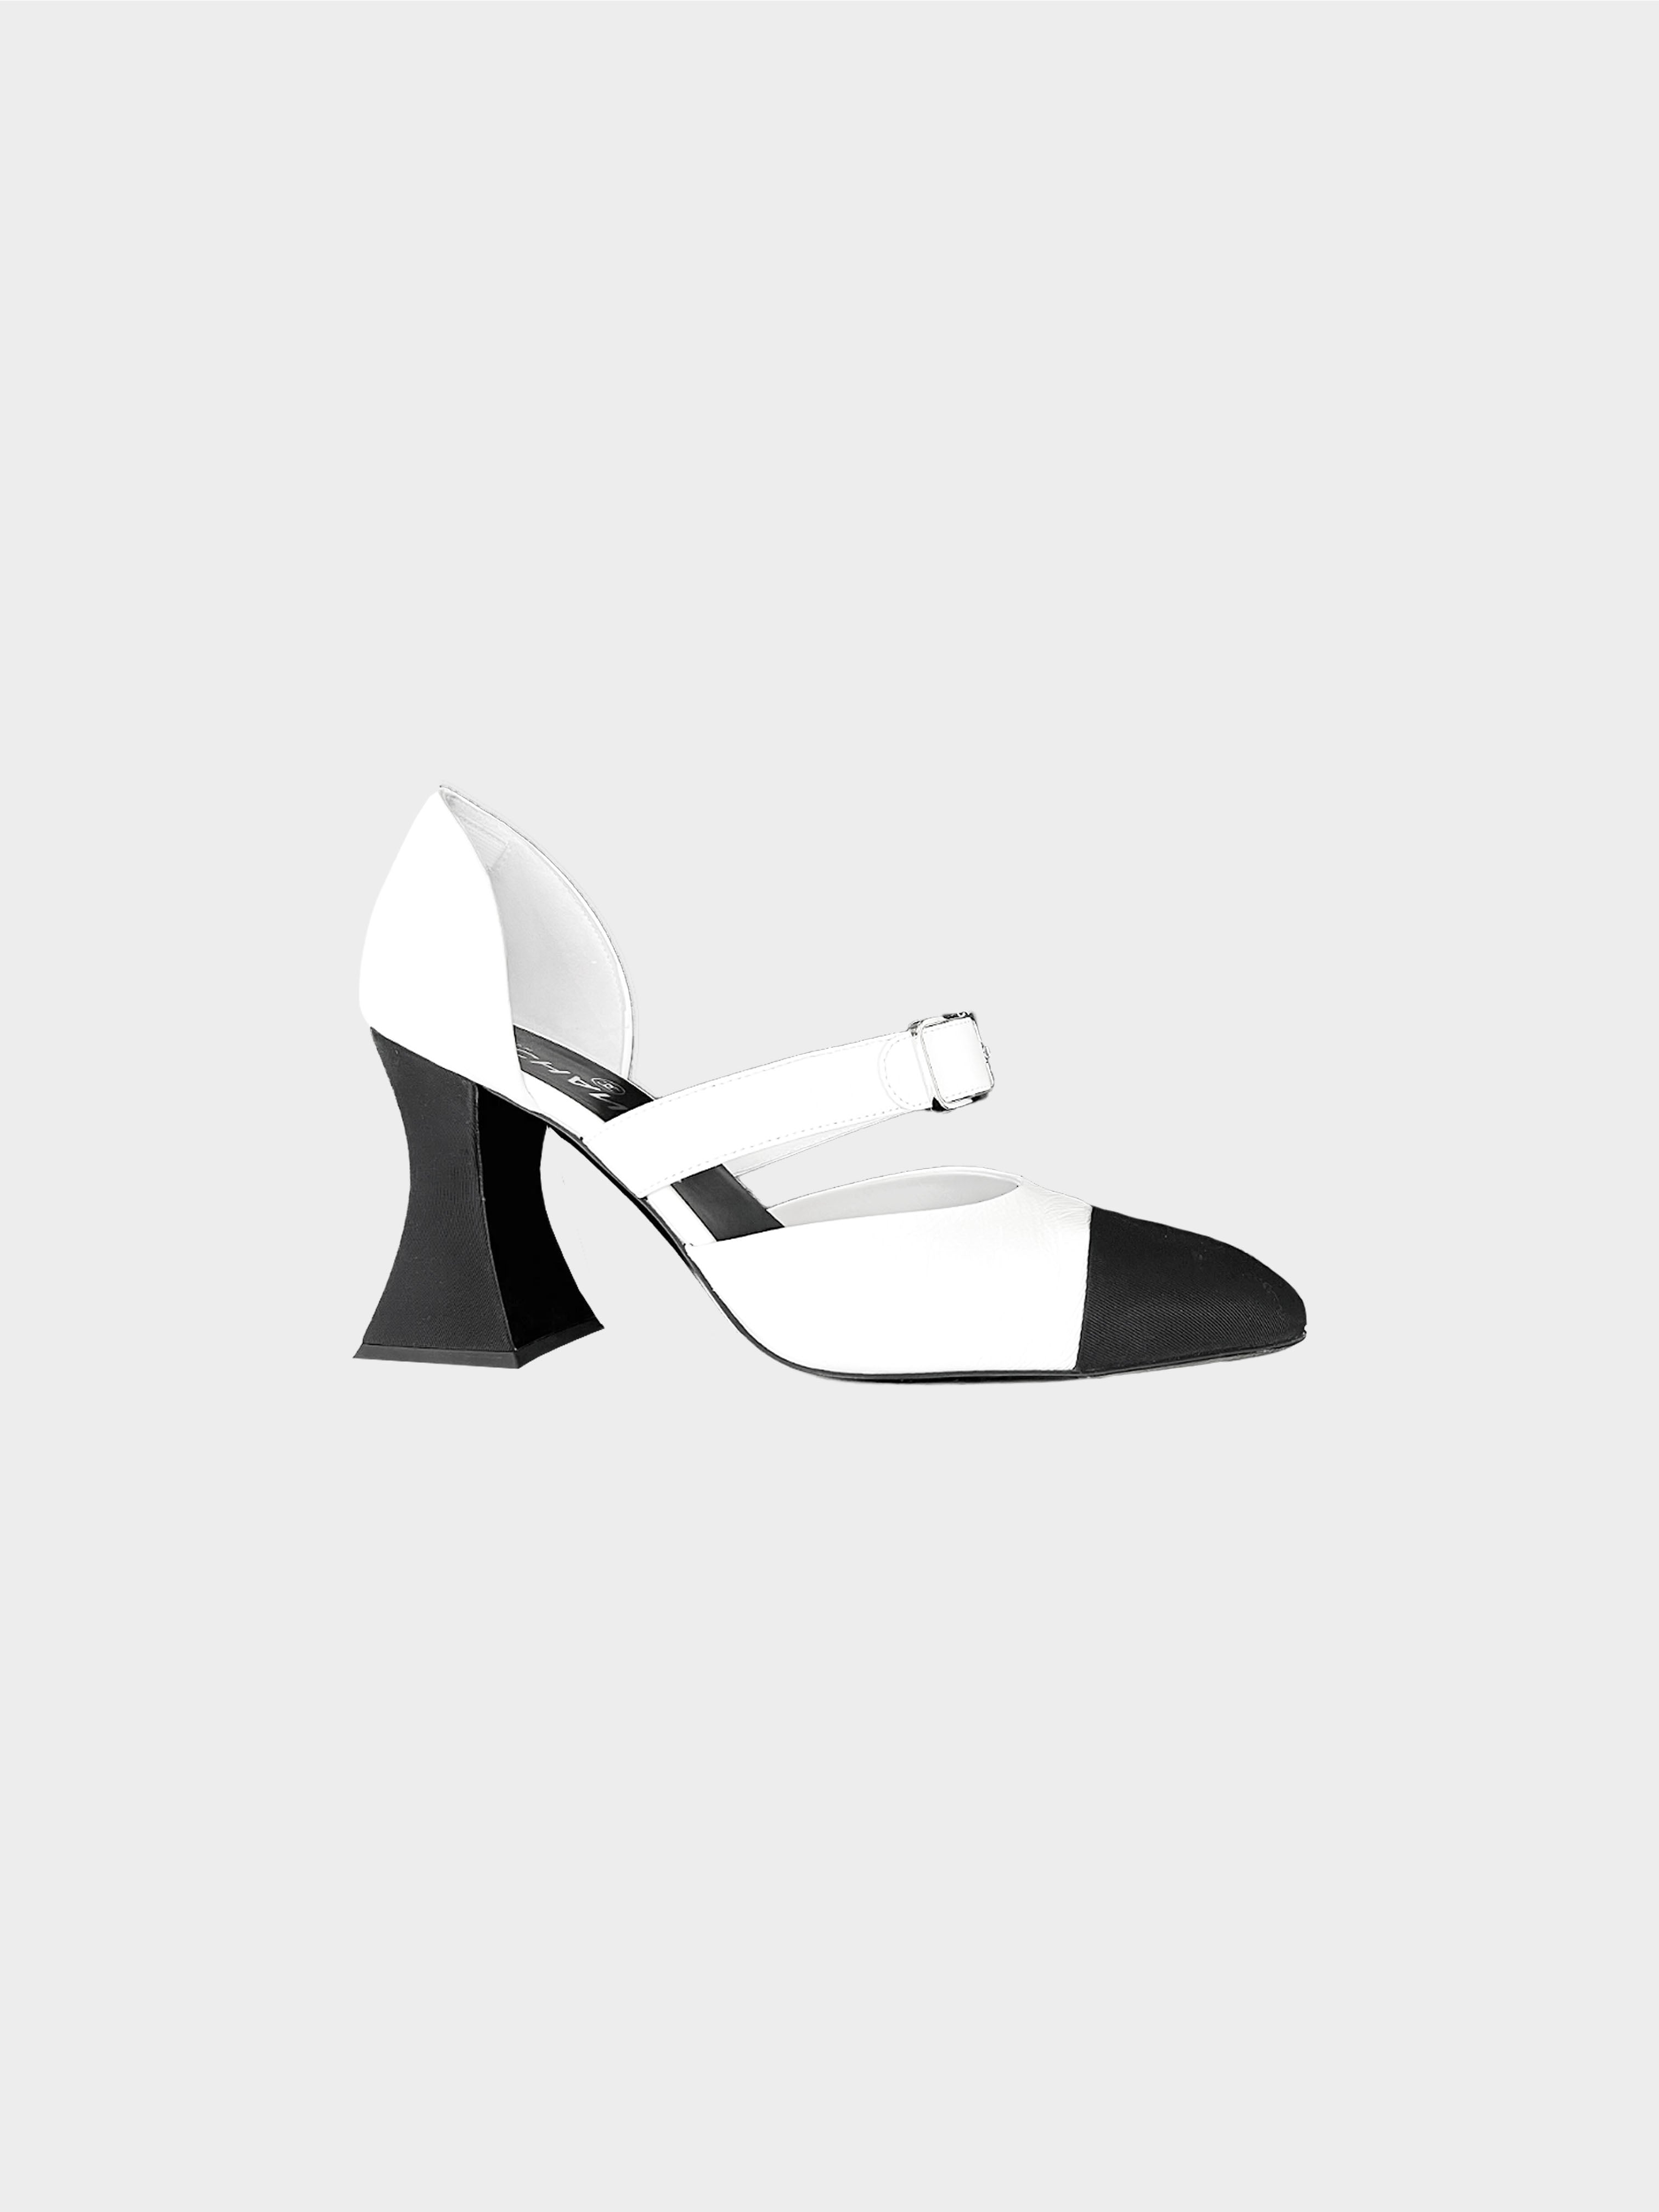 Chanel 2010s Black and White Canvas Leather Pumps